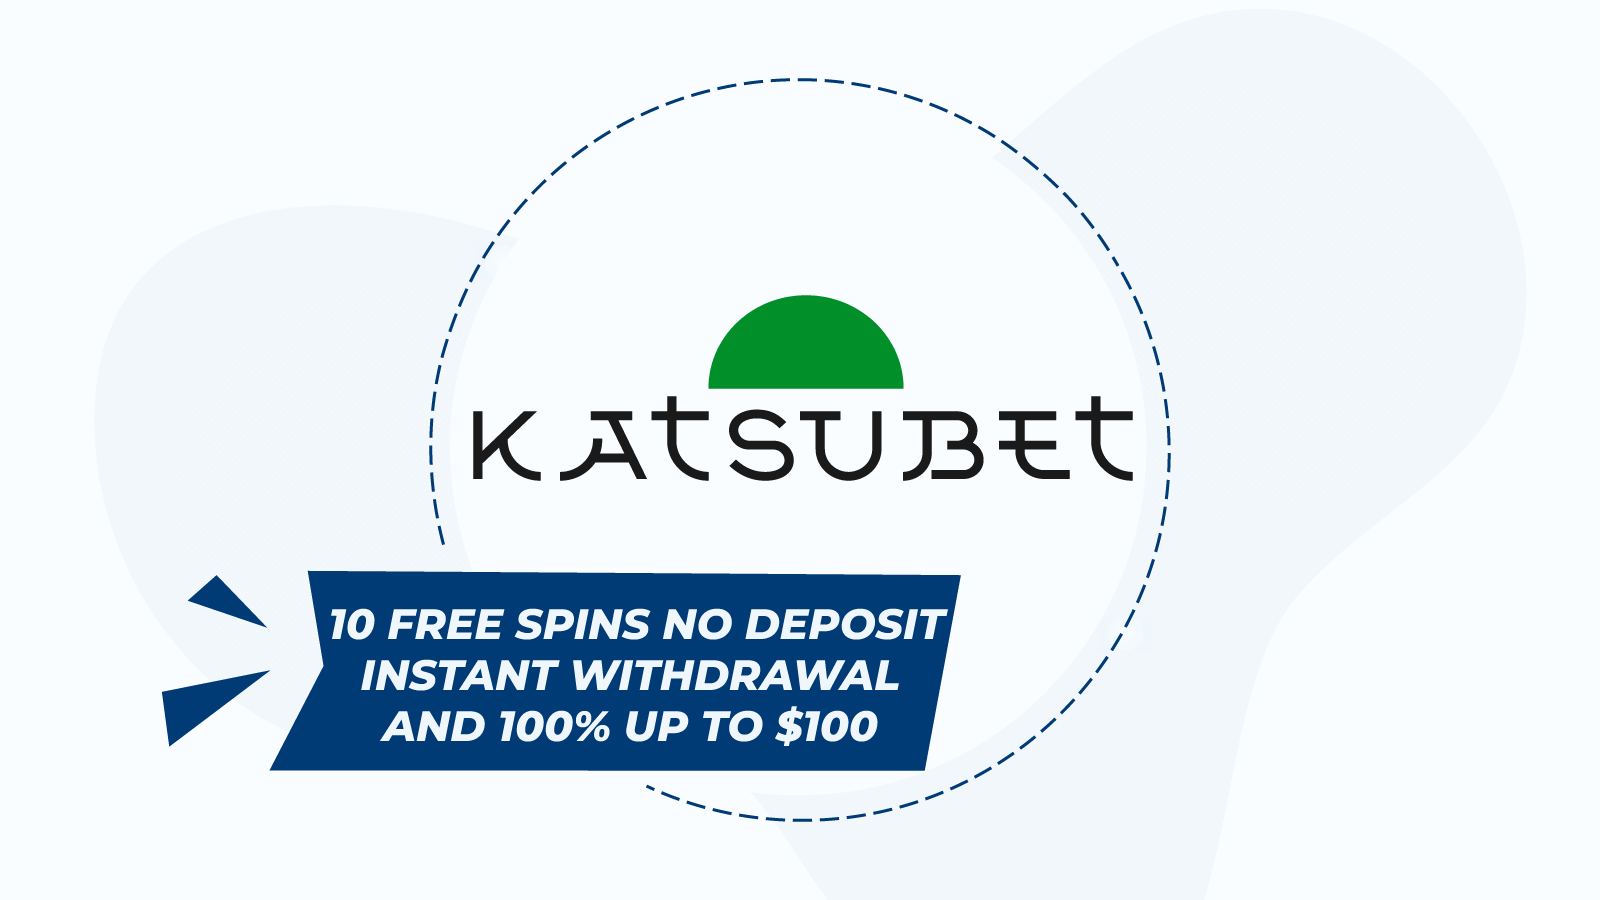 Start with 10 free spins no deposit instant withdrawal and 100% up to $100 at Katsubet